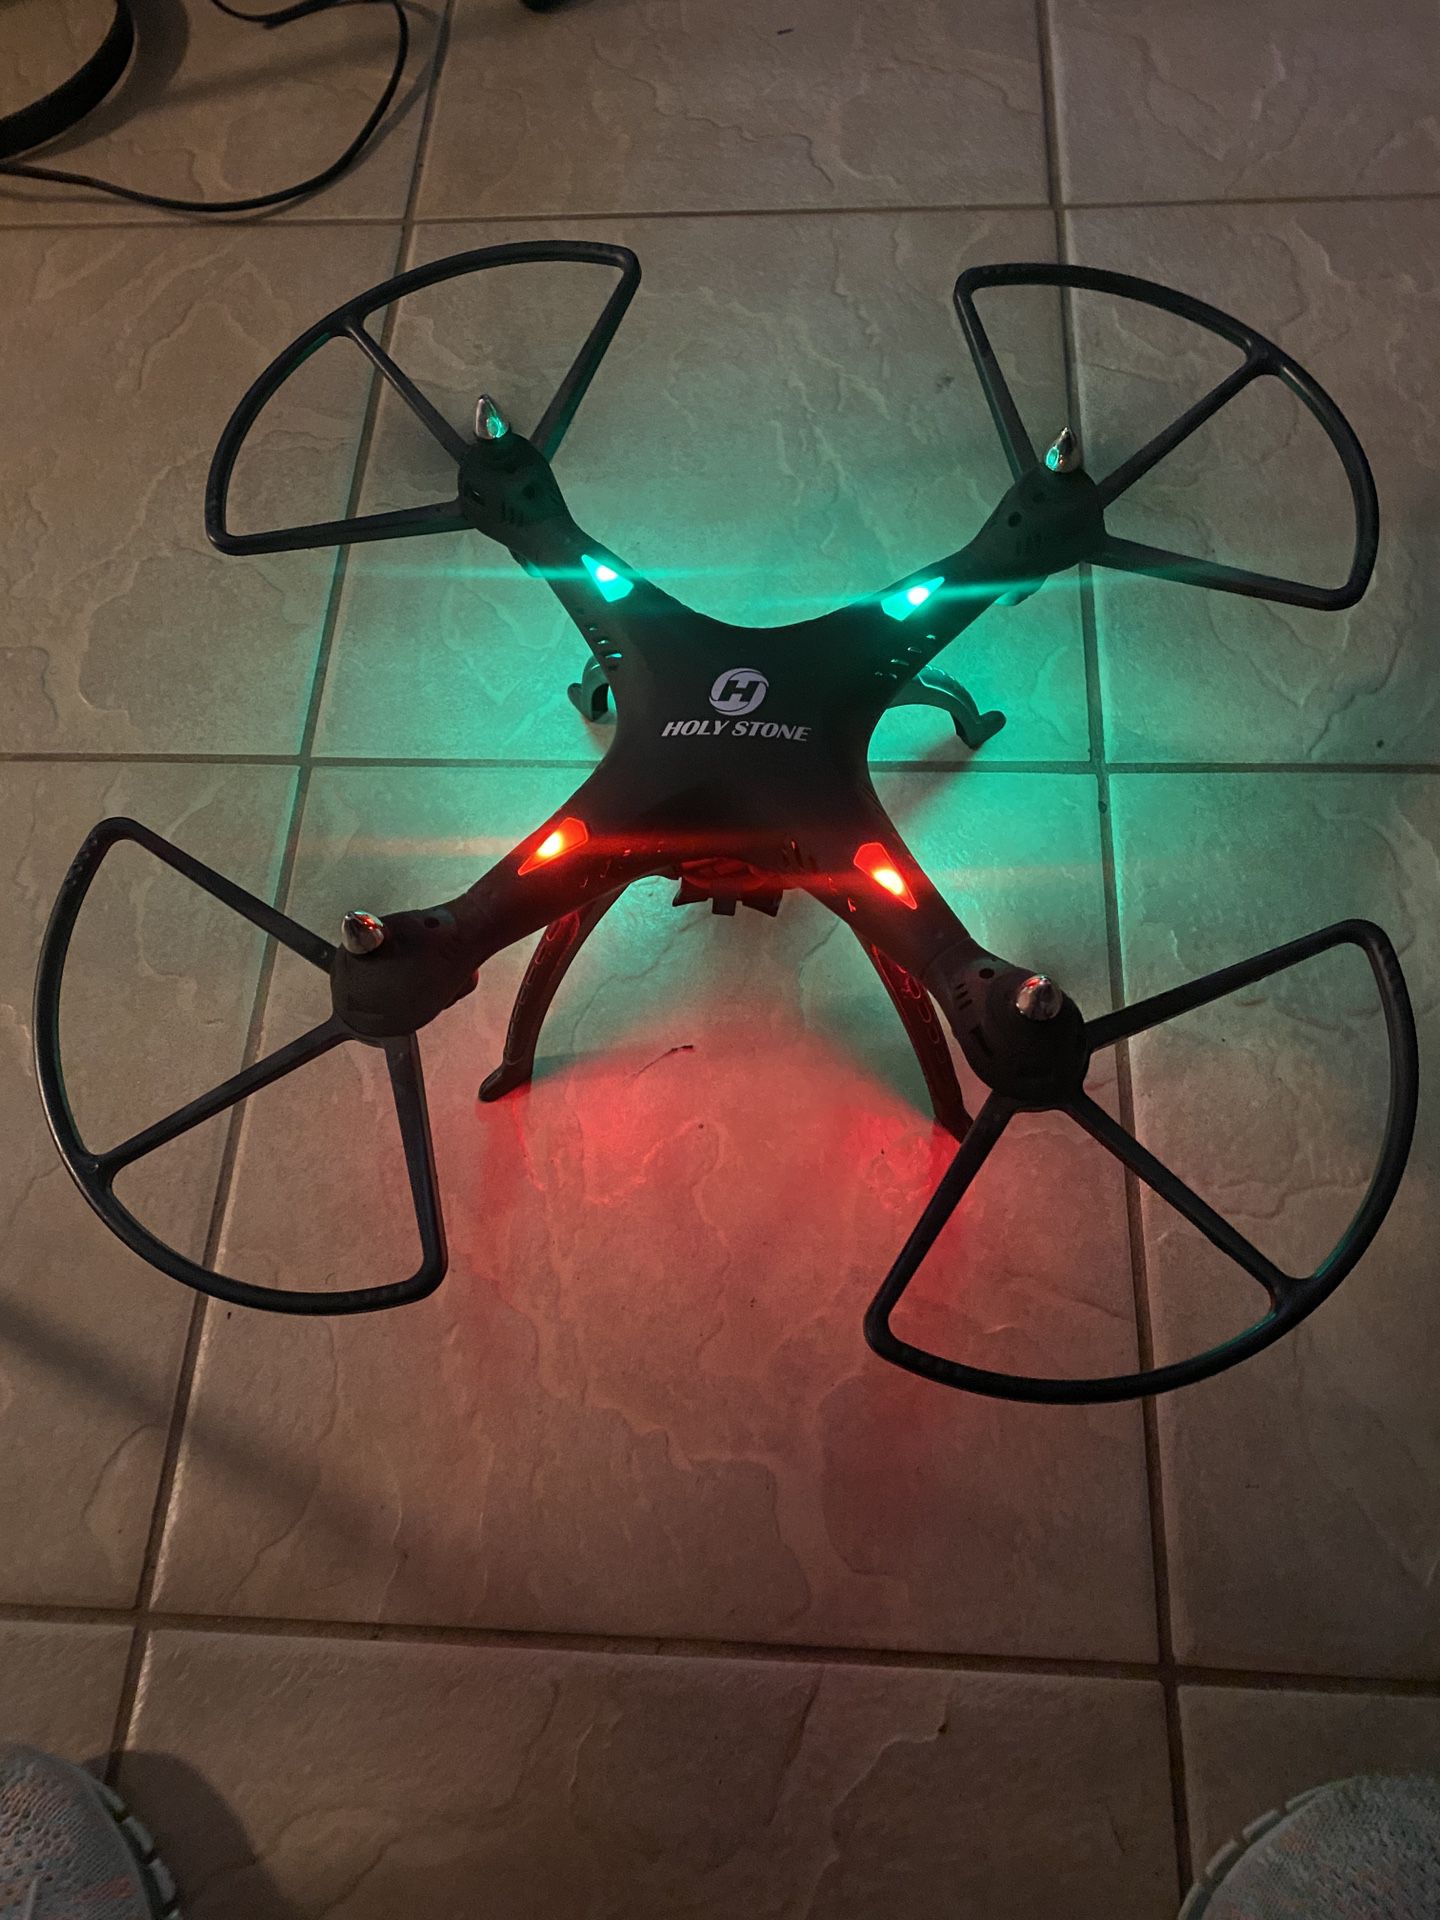 New Holy Stone hs300 Drone for Sale in San Diego, CA - OfferUp